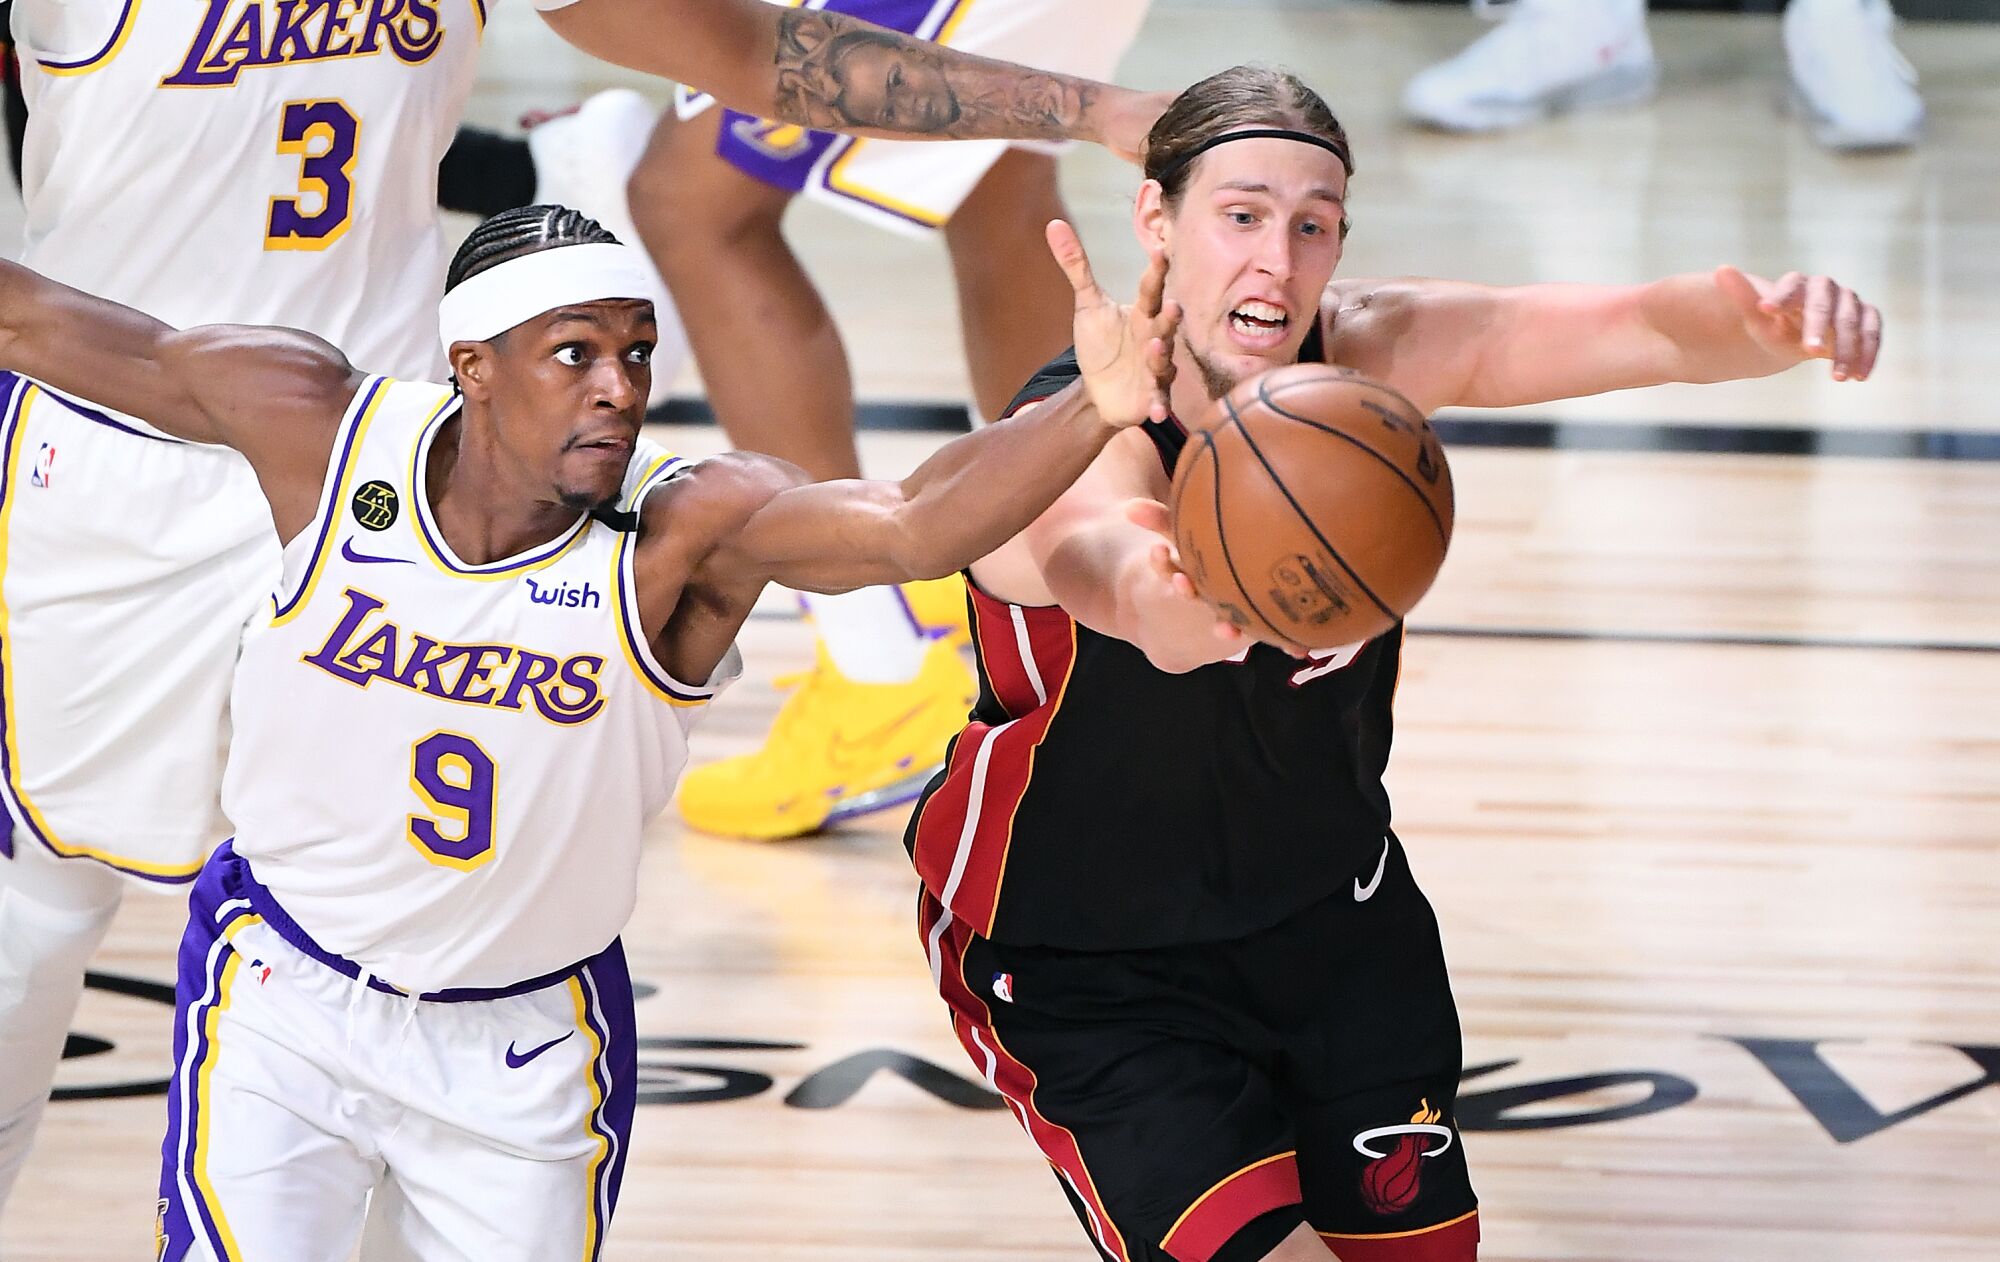 Lakers guard Rajon Rondo and Heat center Kelly Olynyk chase after a loose ball during Game 3.